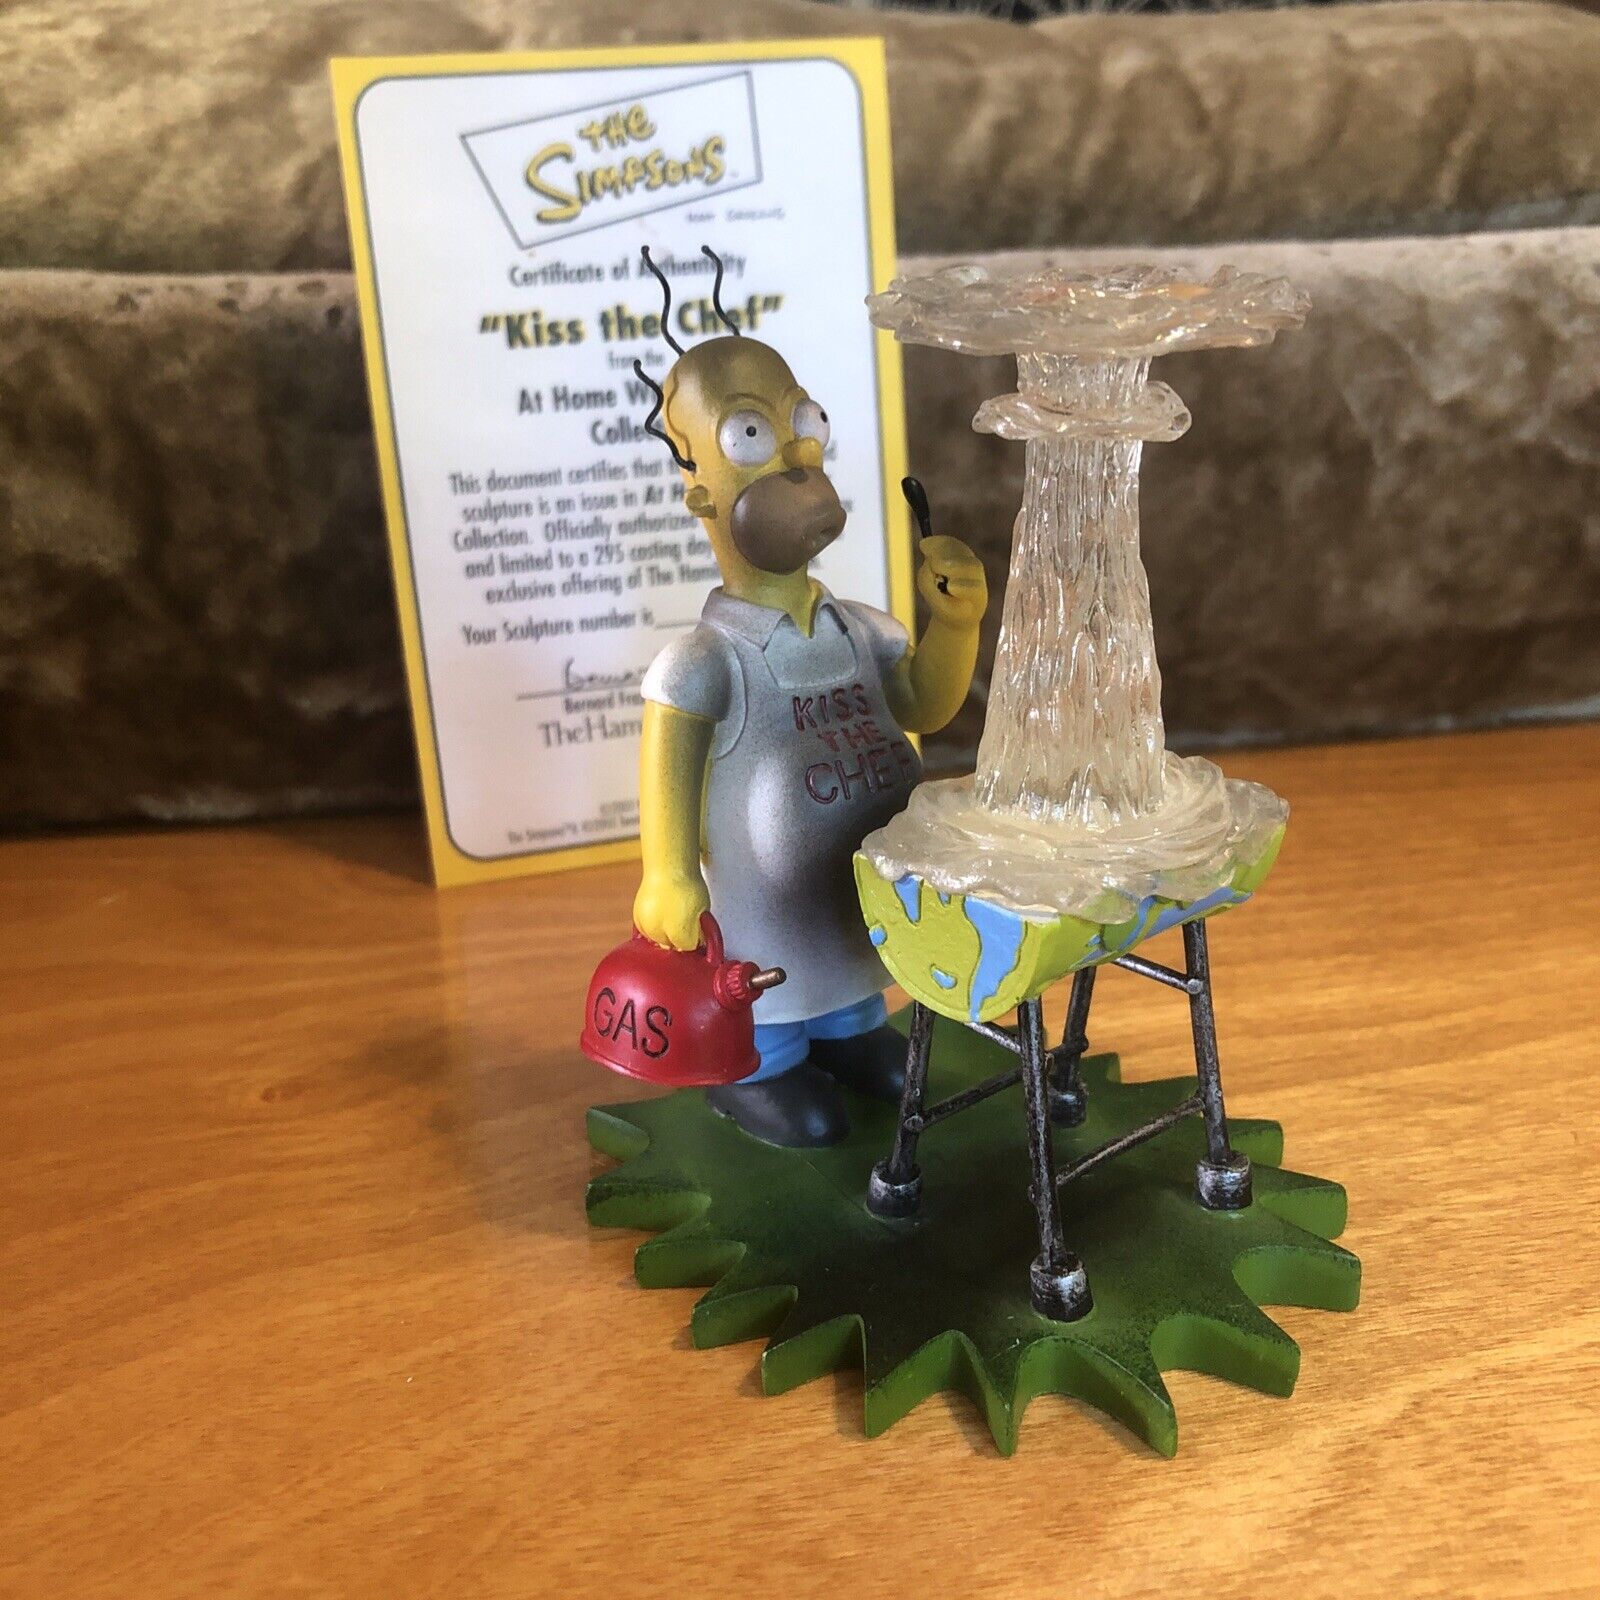 KISS THE CHEF Sculpture The Simpsons Hamilton Collection At Home with COA